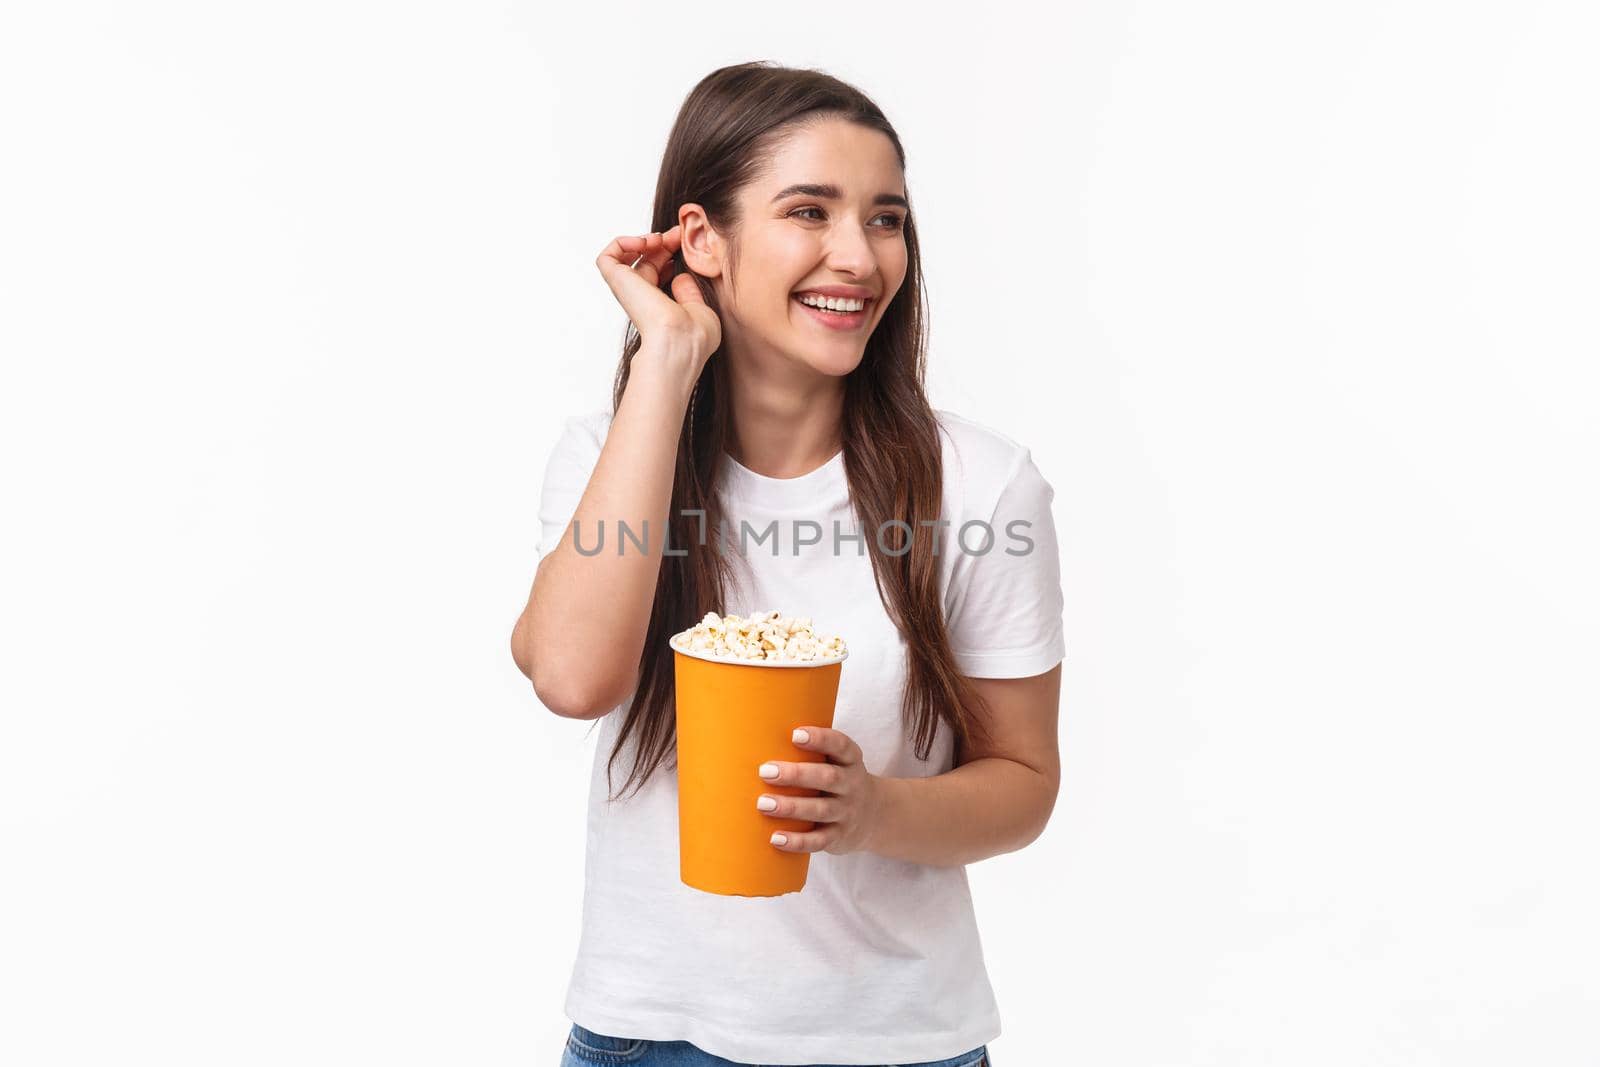 Entertainment, fun and holidays concept. Portrait of beautiful young carefree friendly woman in glasses, place hair strand behind ear giggle joyful watching movie in cinema, eating popcorn.